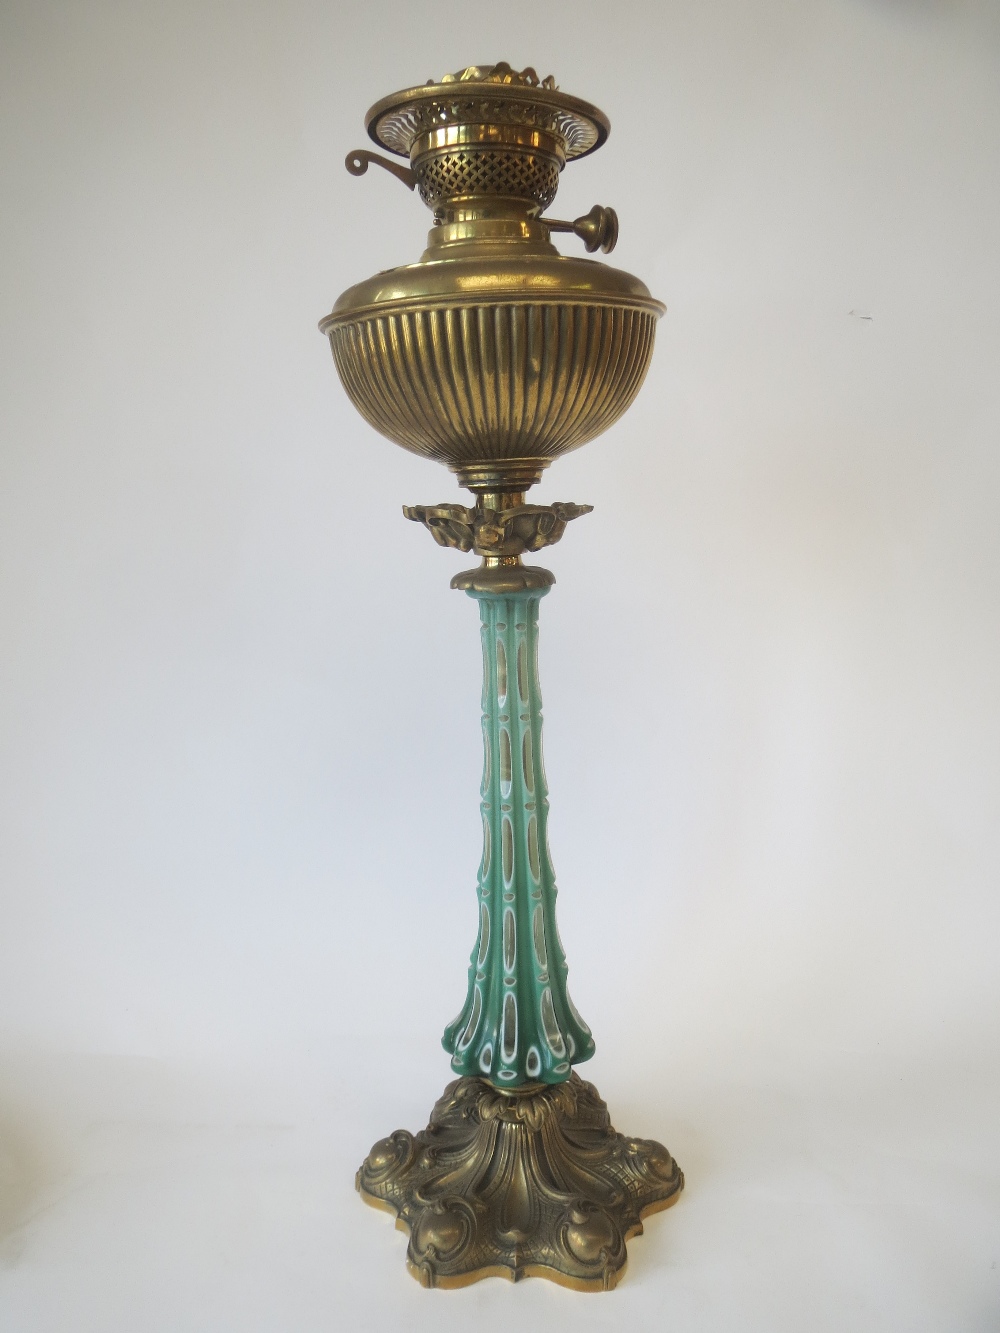 Green and white opaline and lacquered brass "Duplex" oil lamp, 58cm high